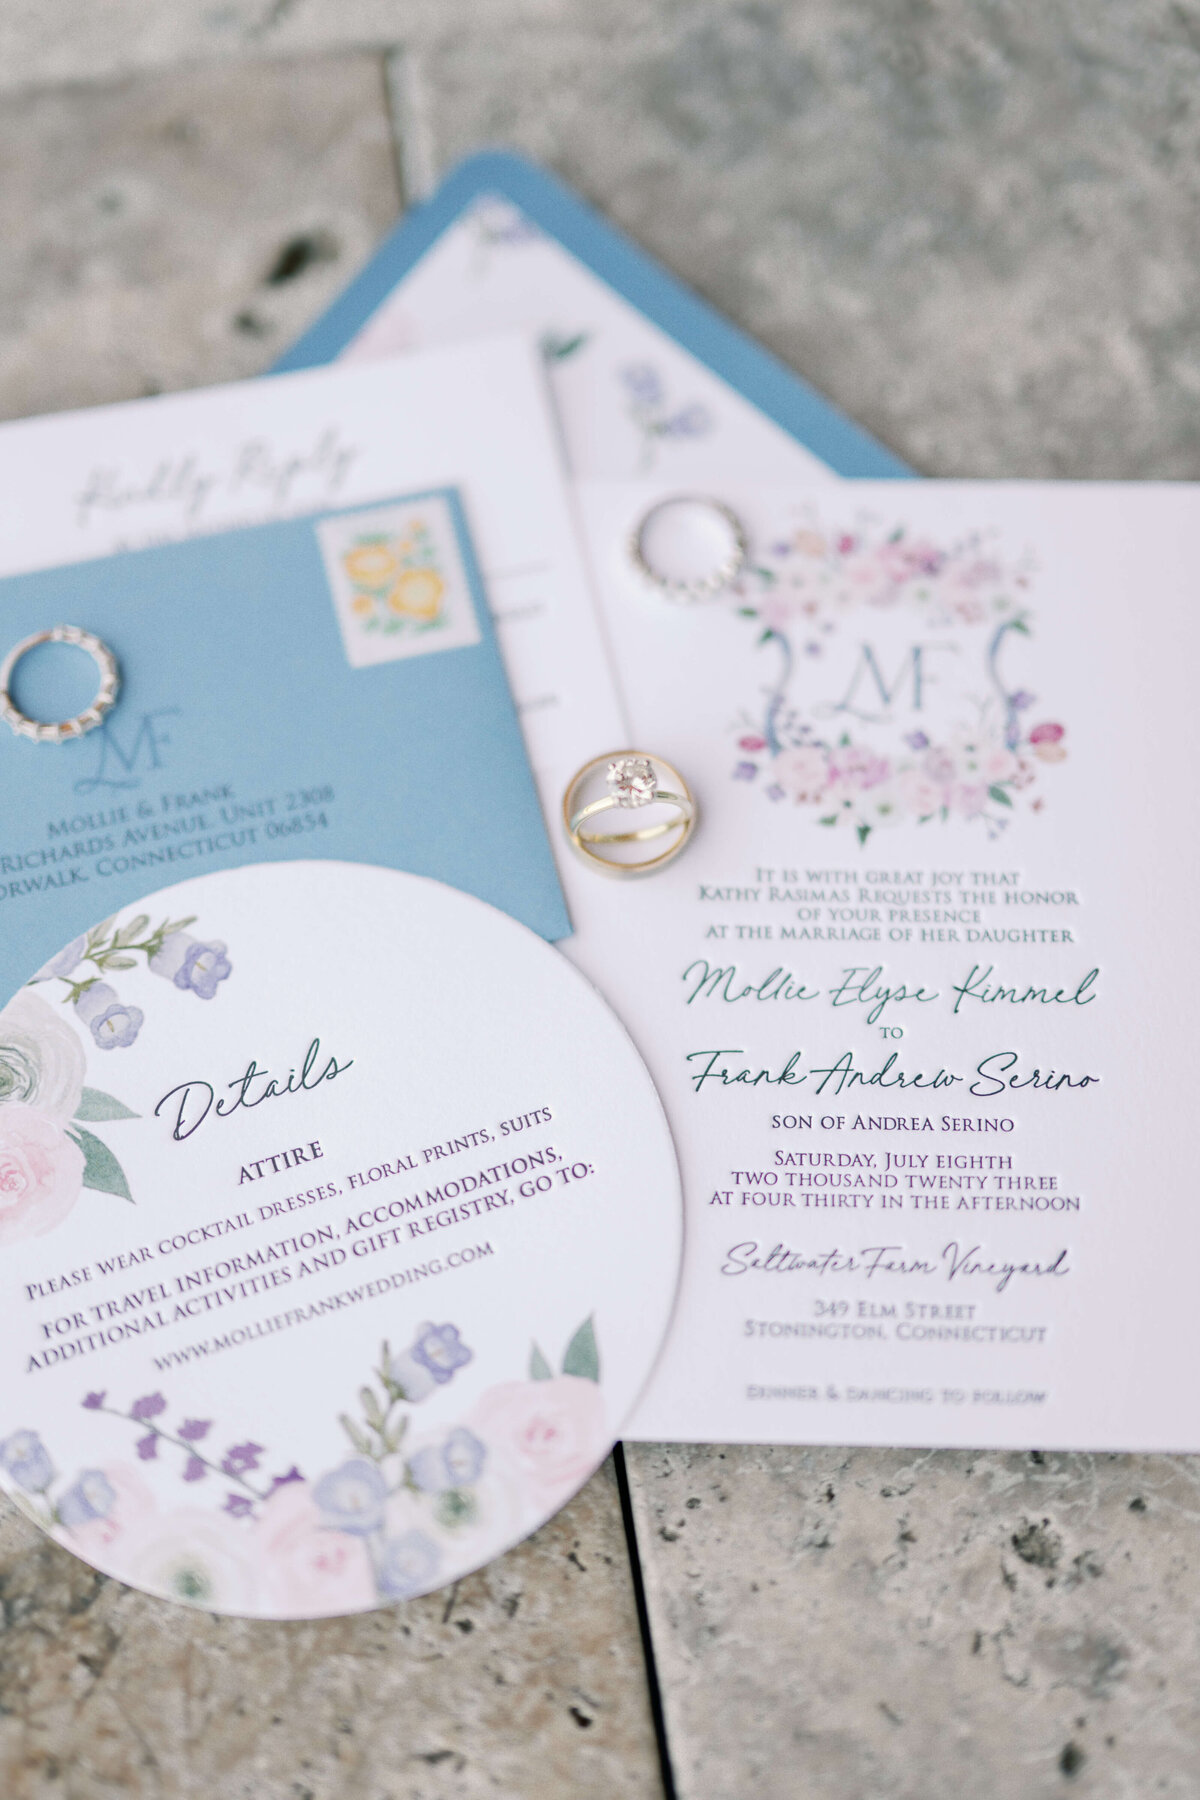 Wedding stationary and rings